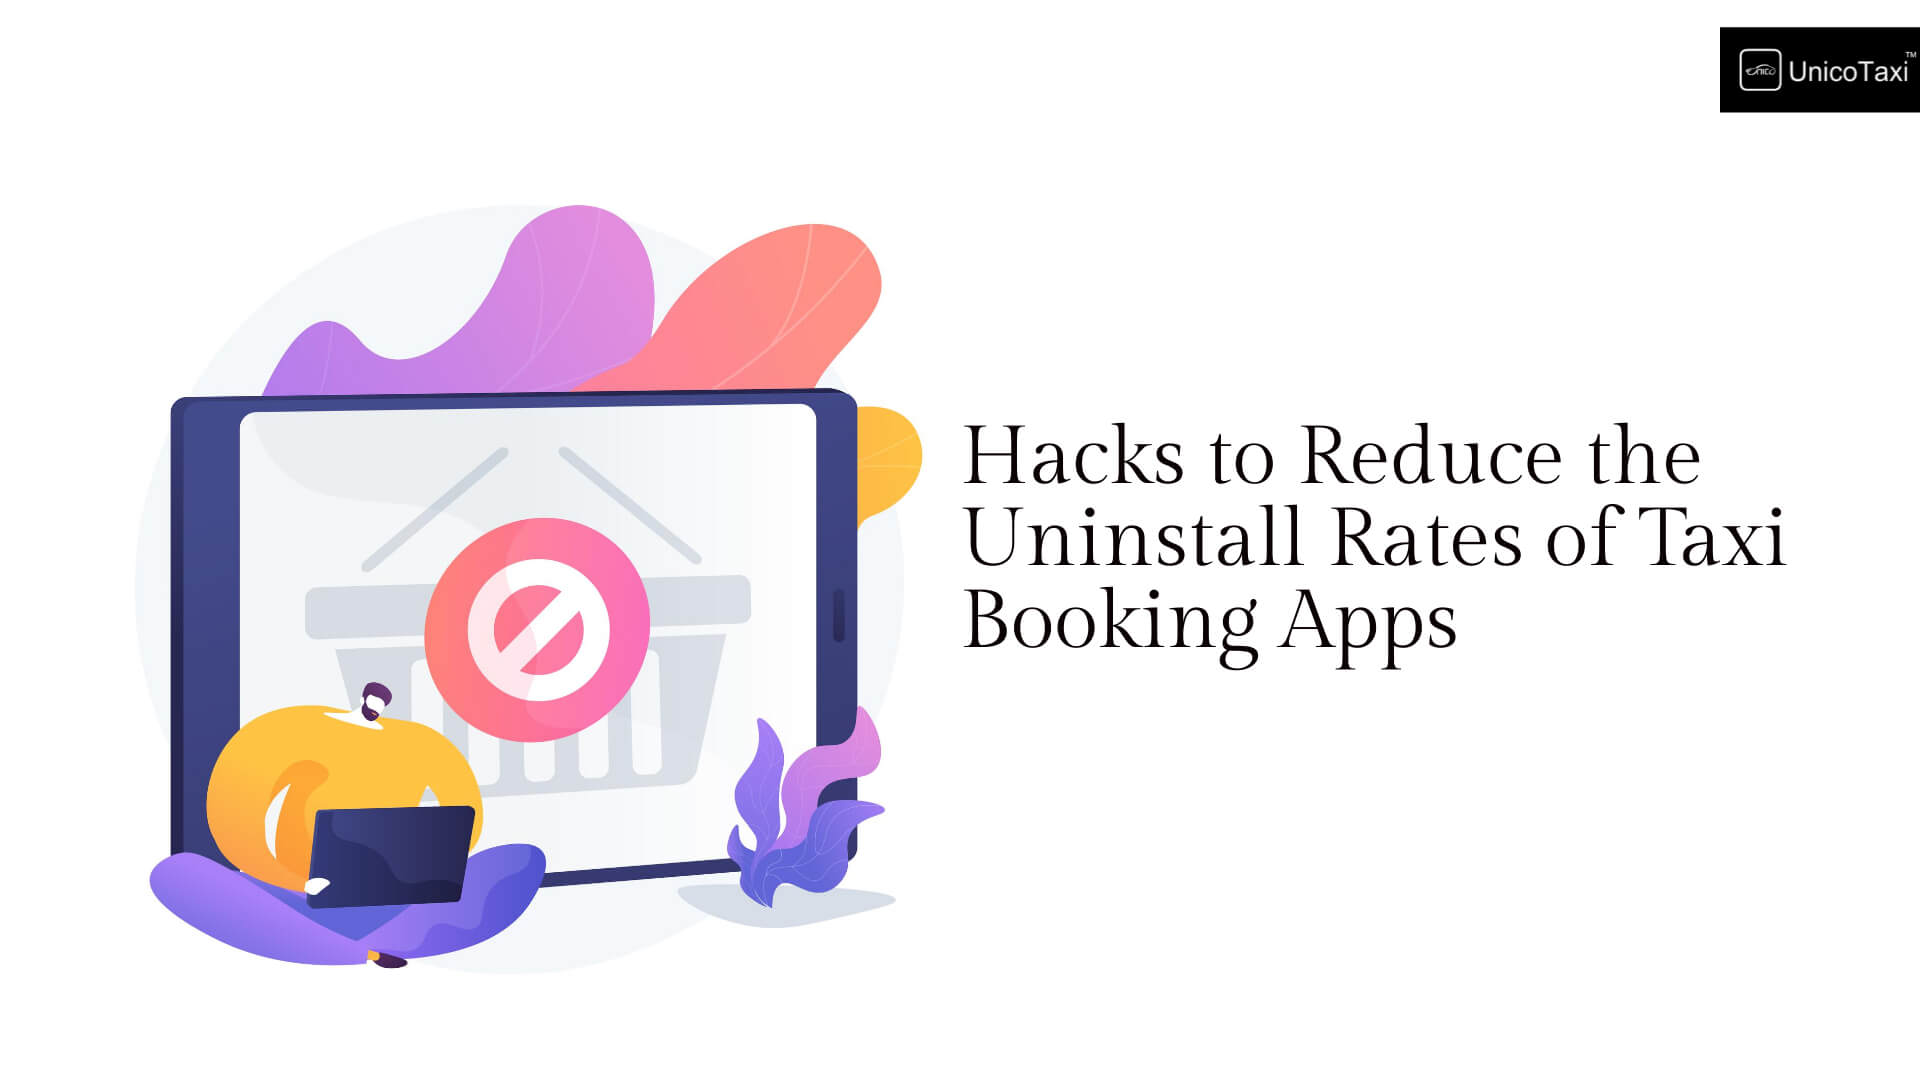 Hacks to Reduce the Uninstall Rates of Taxi Booking Apps